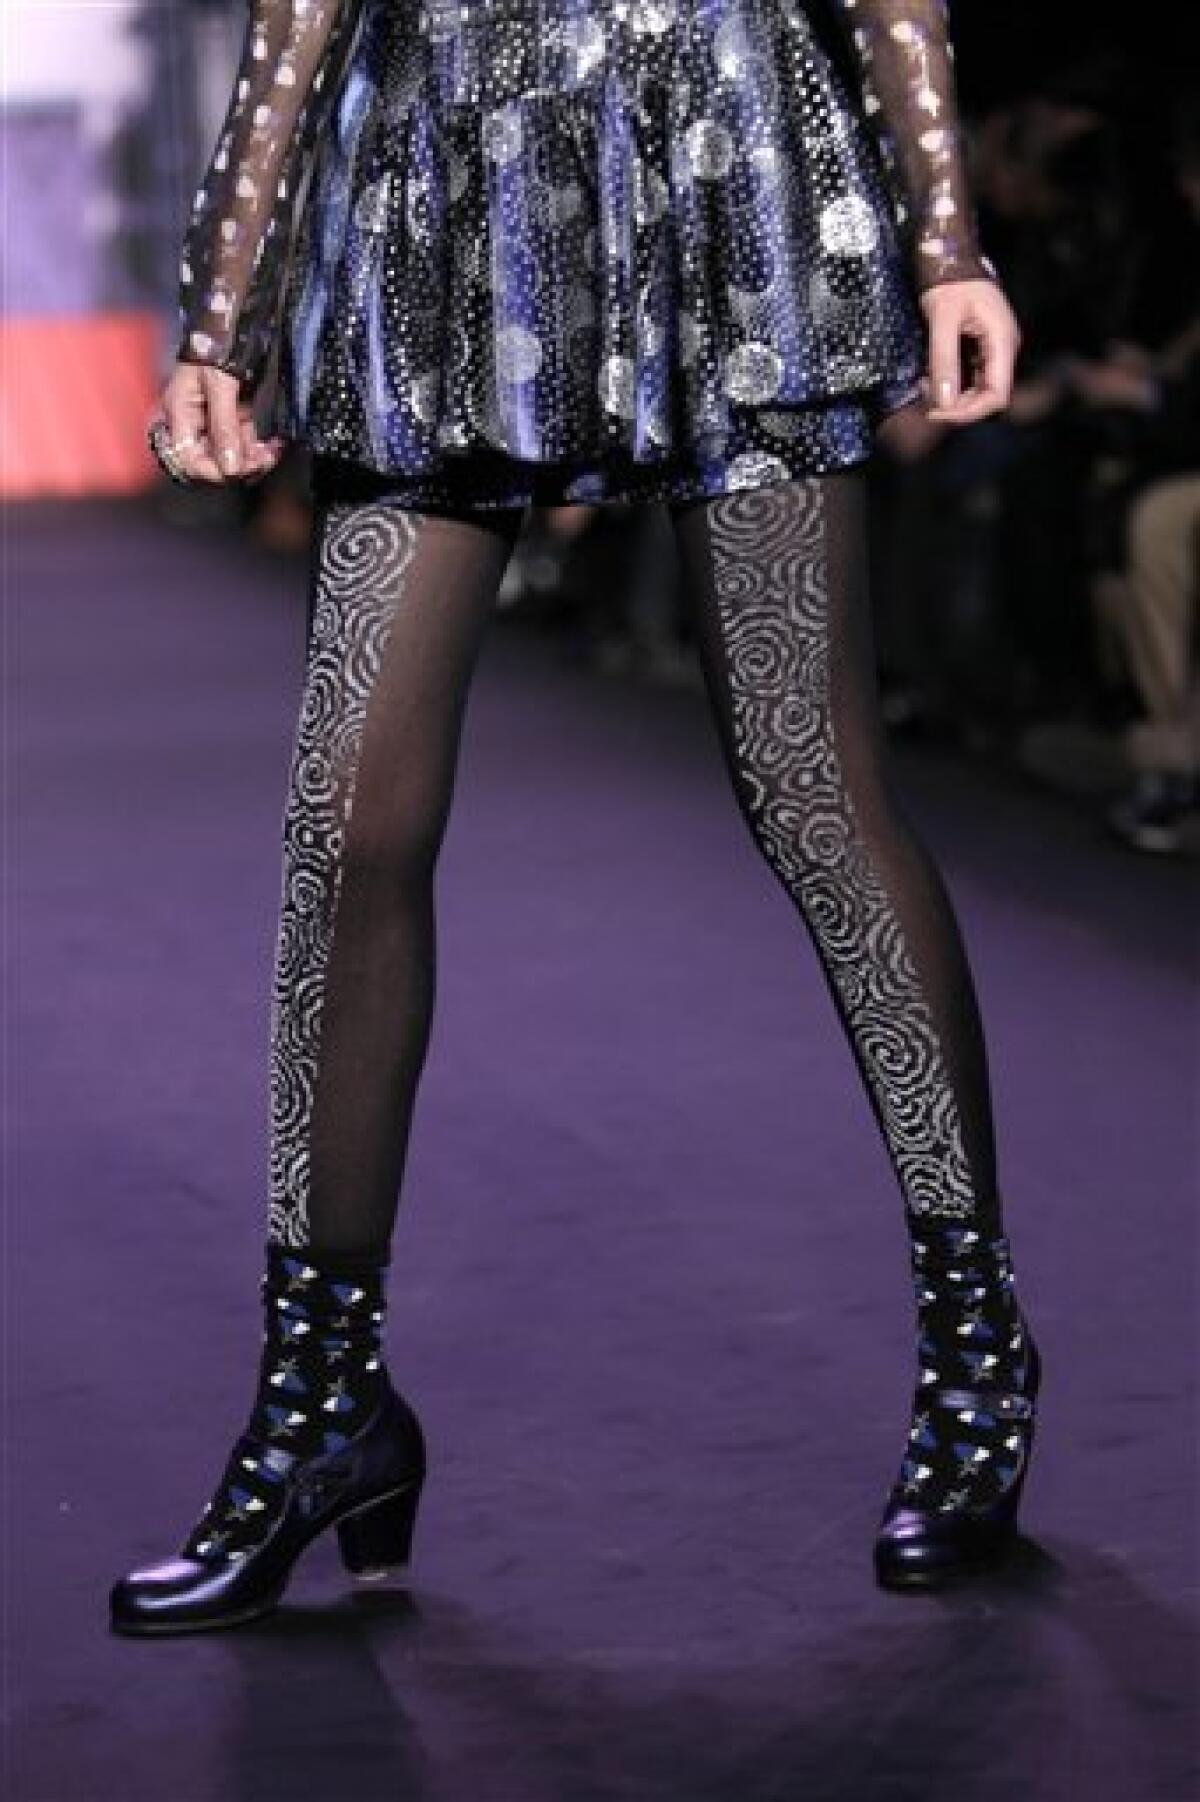 Fall 2011 fashion from Anna Sui is modeled during Fashion Week in New York, Wednesday, Feb. 16, 2011. (AP Photo/Seth Wenig)